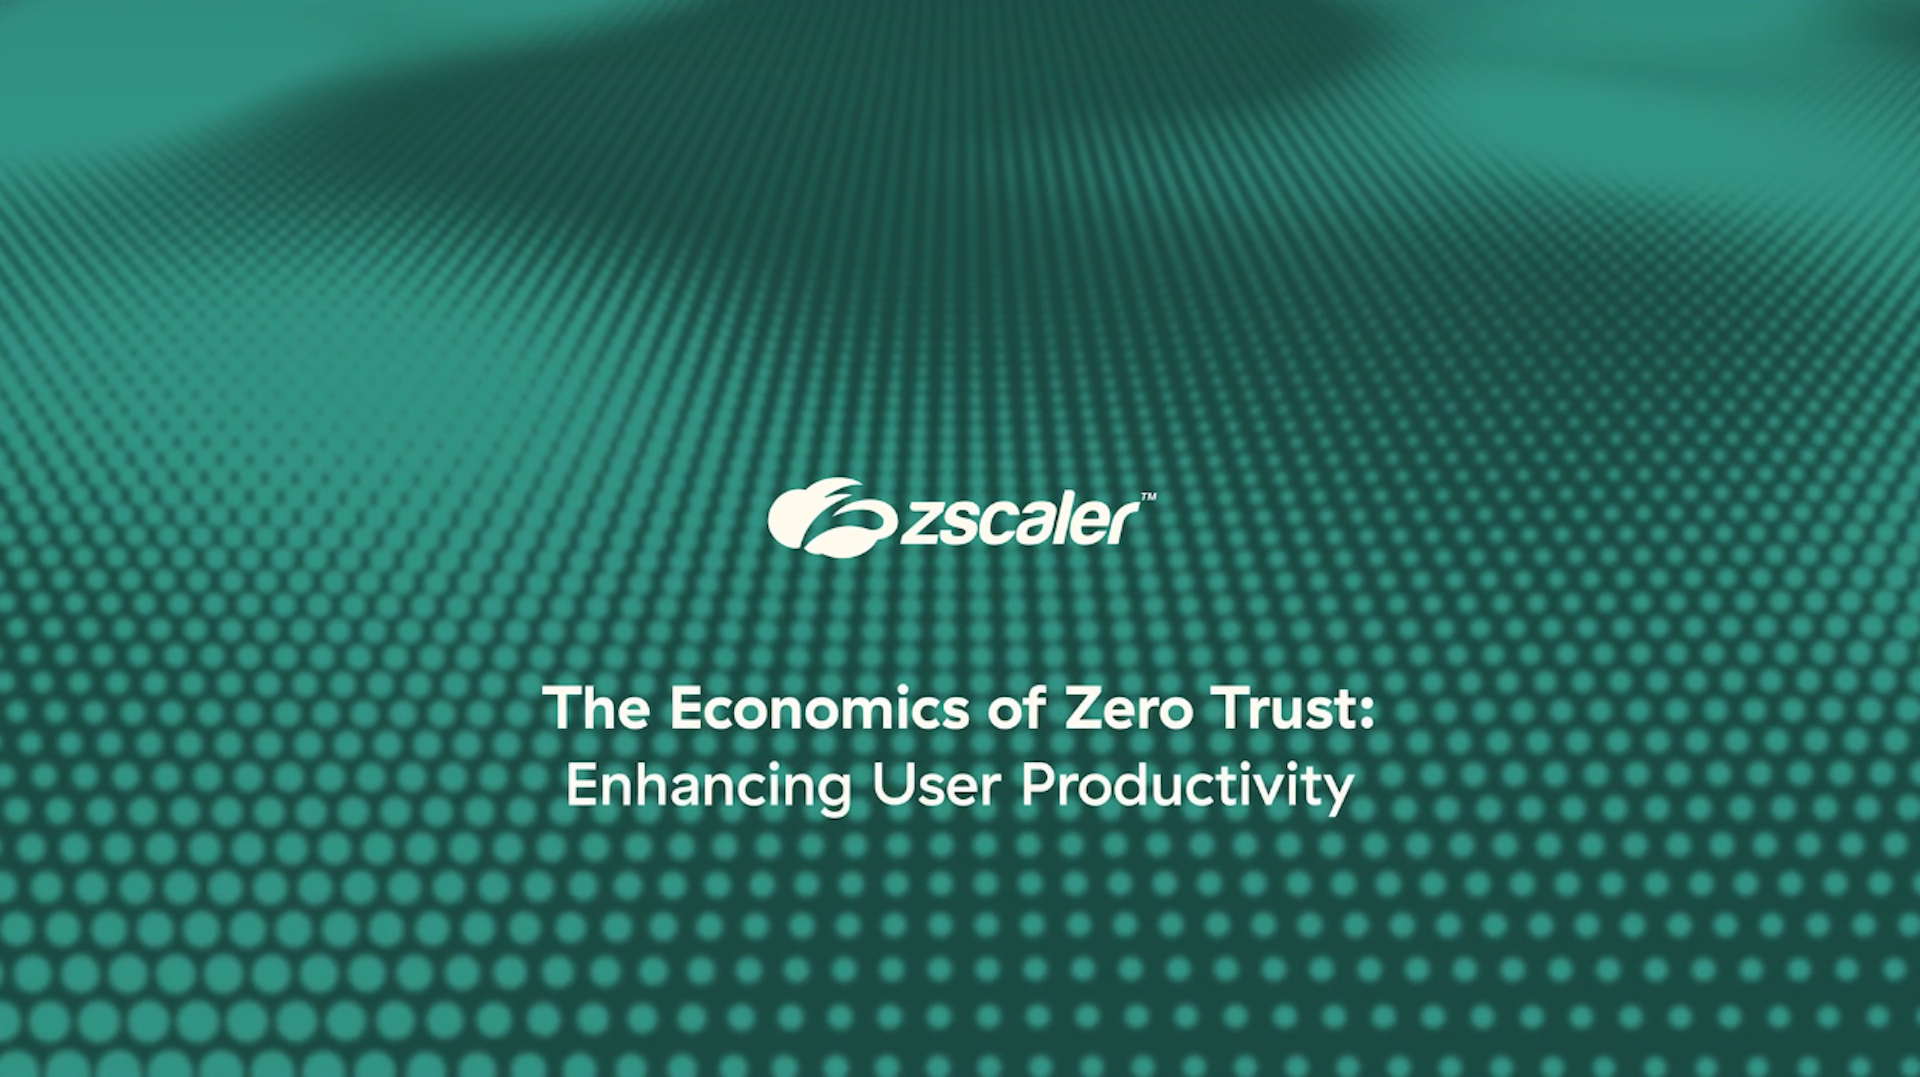 Video about Saving Money with Zero Trust through Enhancing User Experiences